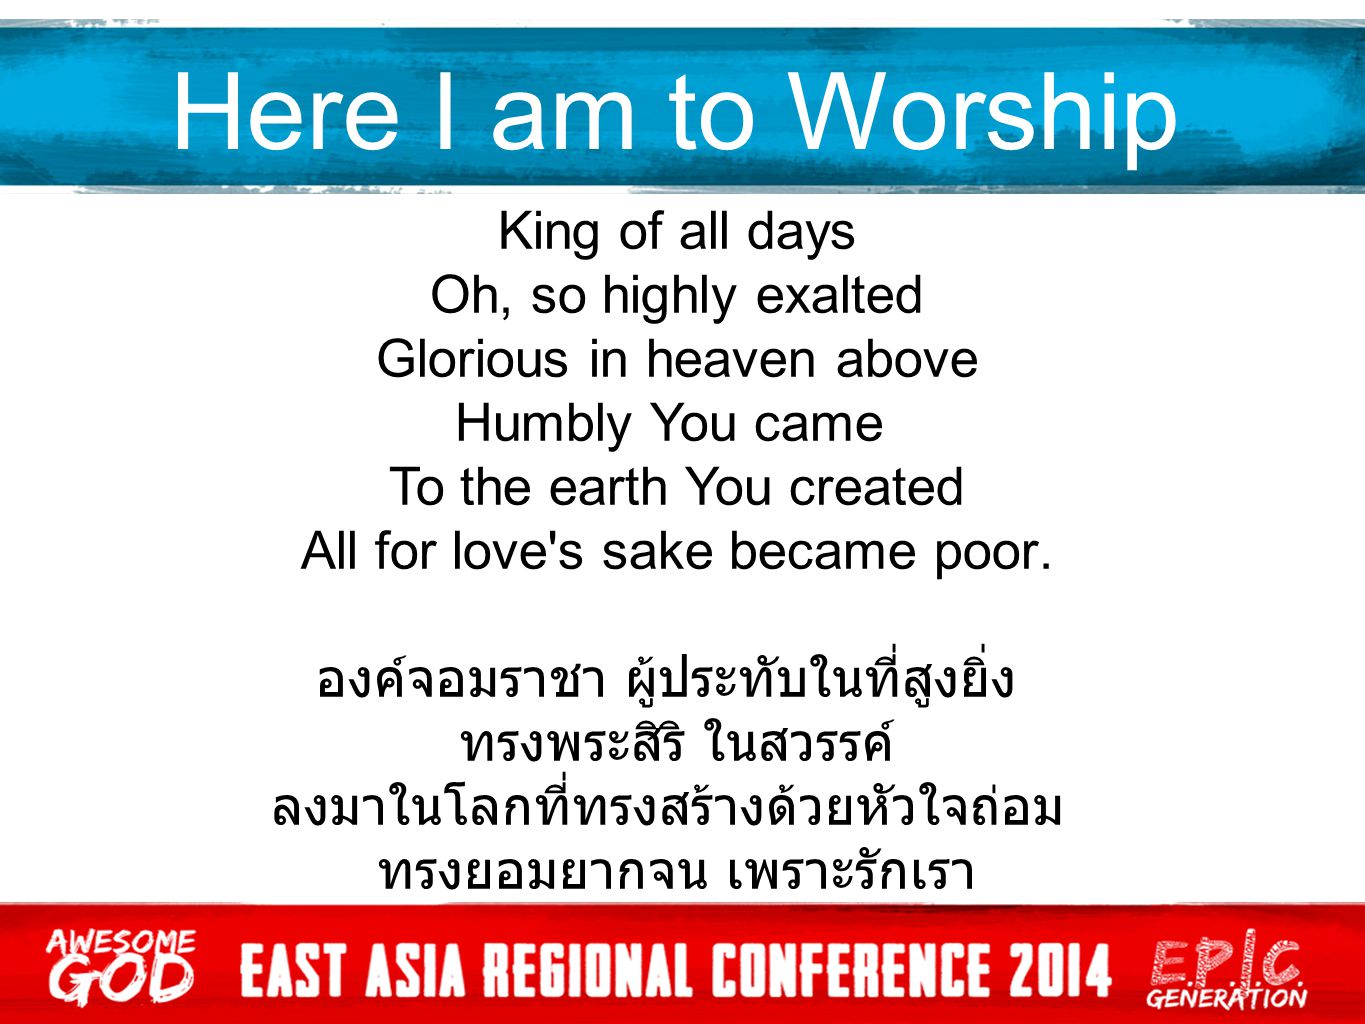 Here I am to Worship King of all days Oh, so highly exalted